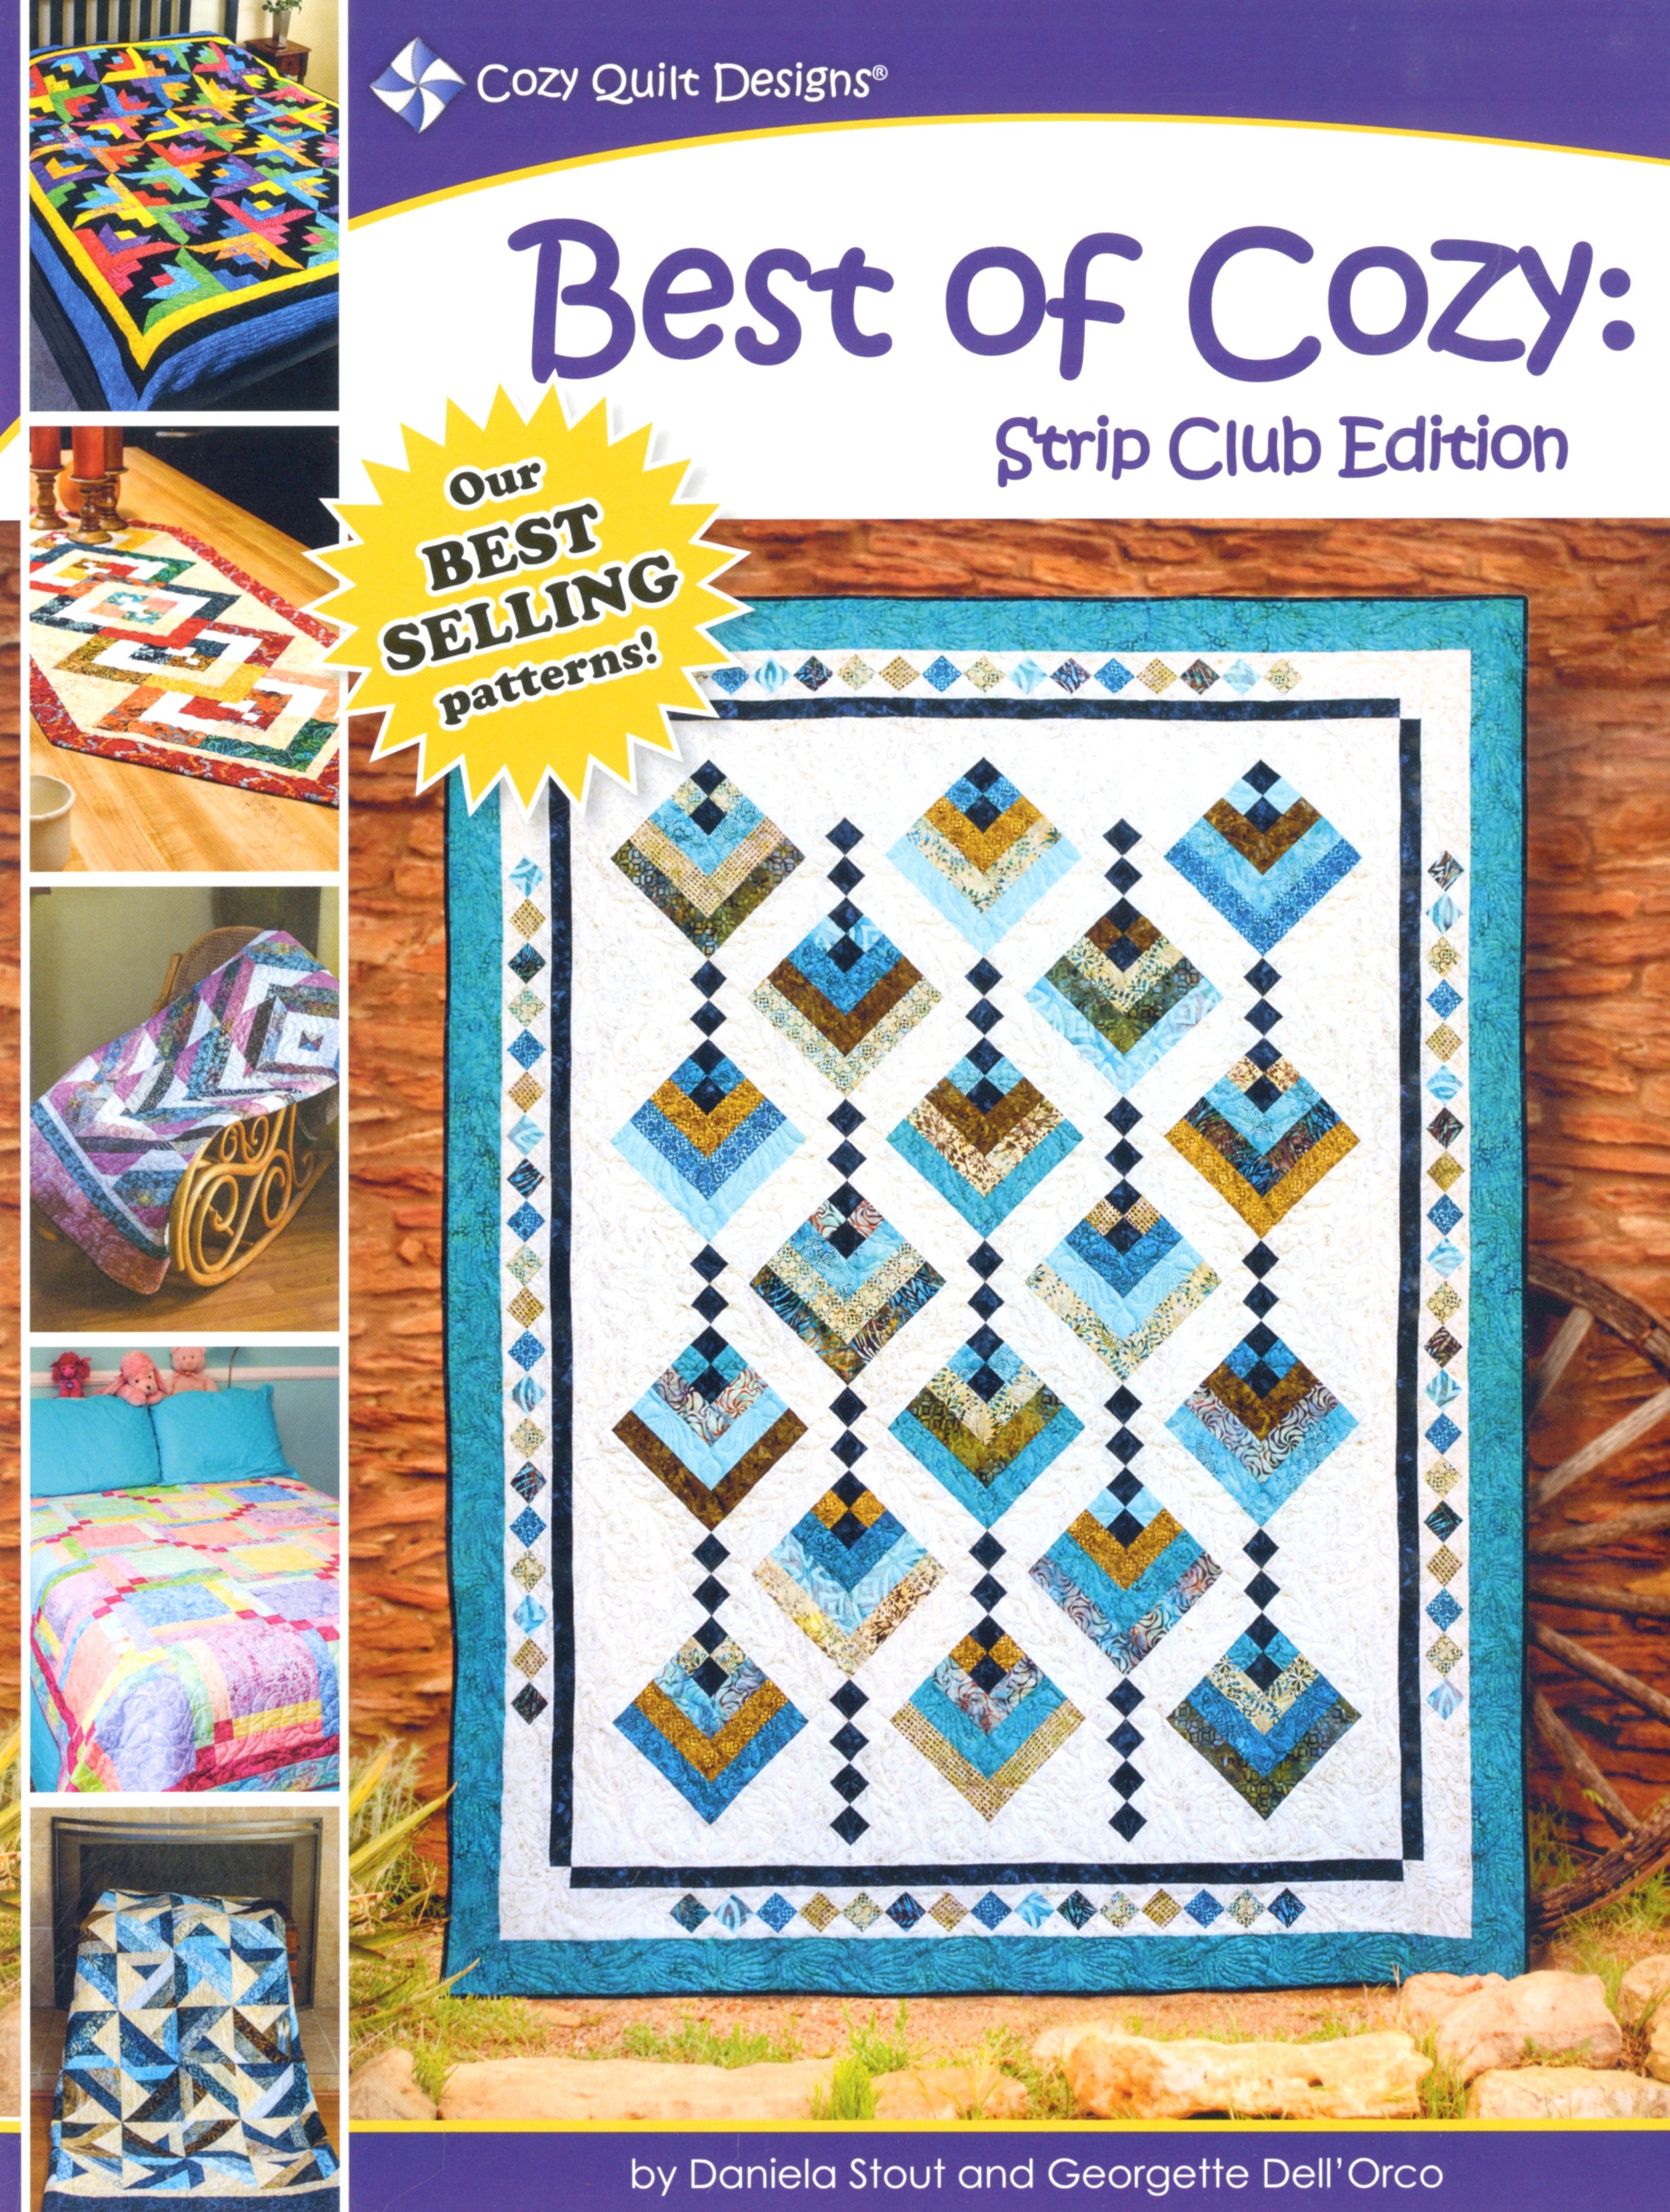 Best Of Cozy: Strip Club Edition Quilt Pattern book by Daniela Stout of Cozy Quilt Designs